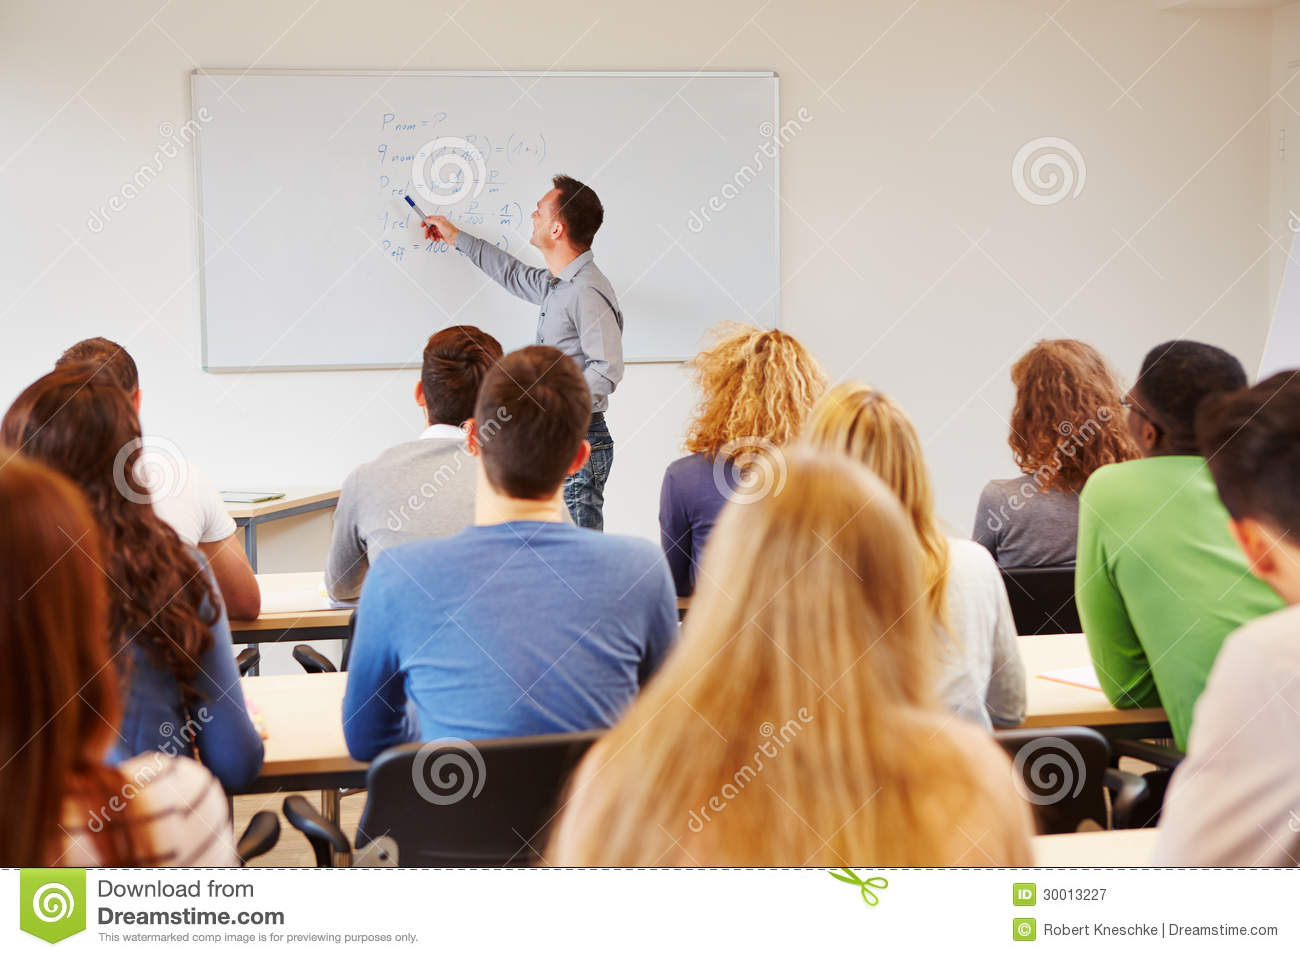 Students Listening To Teacher In Class On A Whiteboard